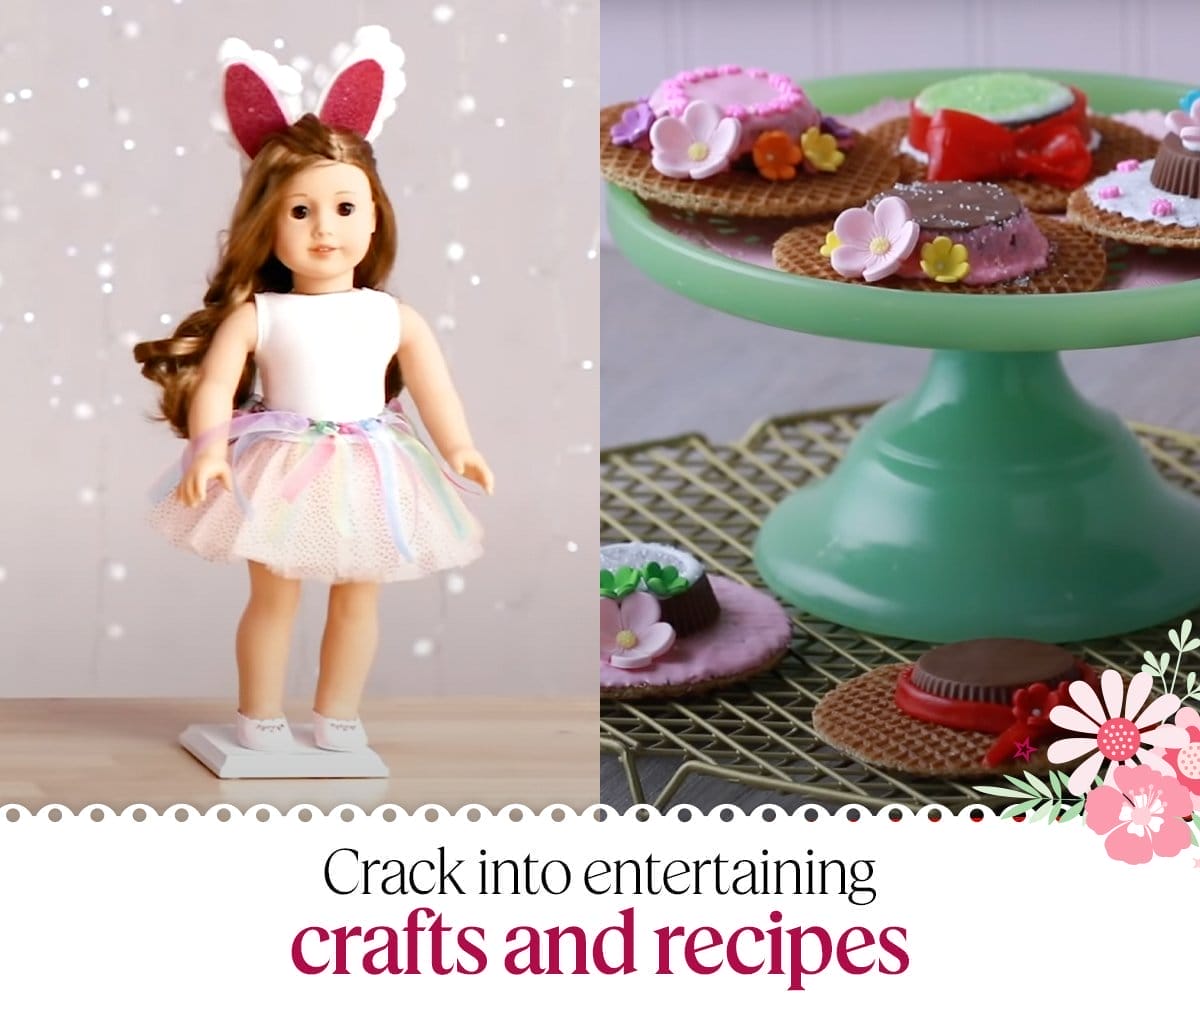 CB2: crafts and recipes